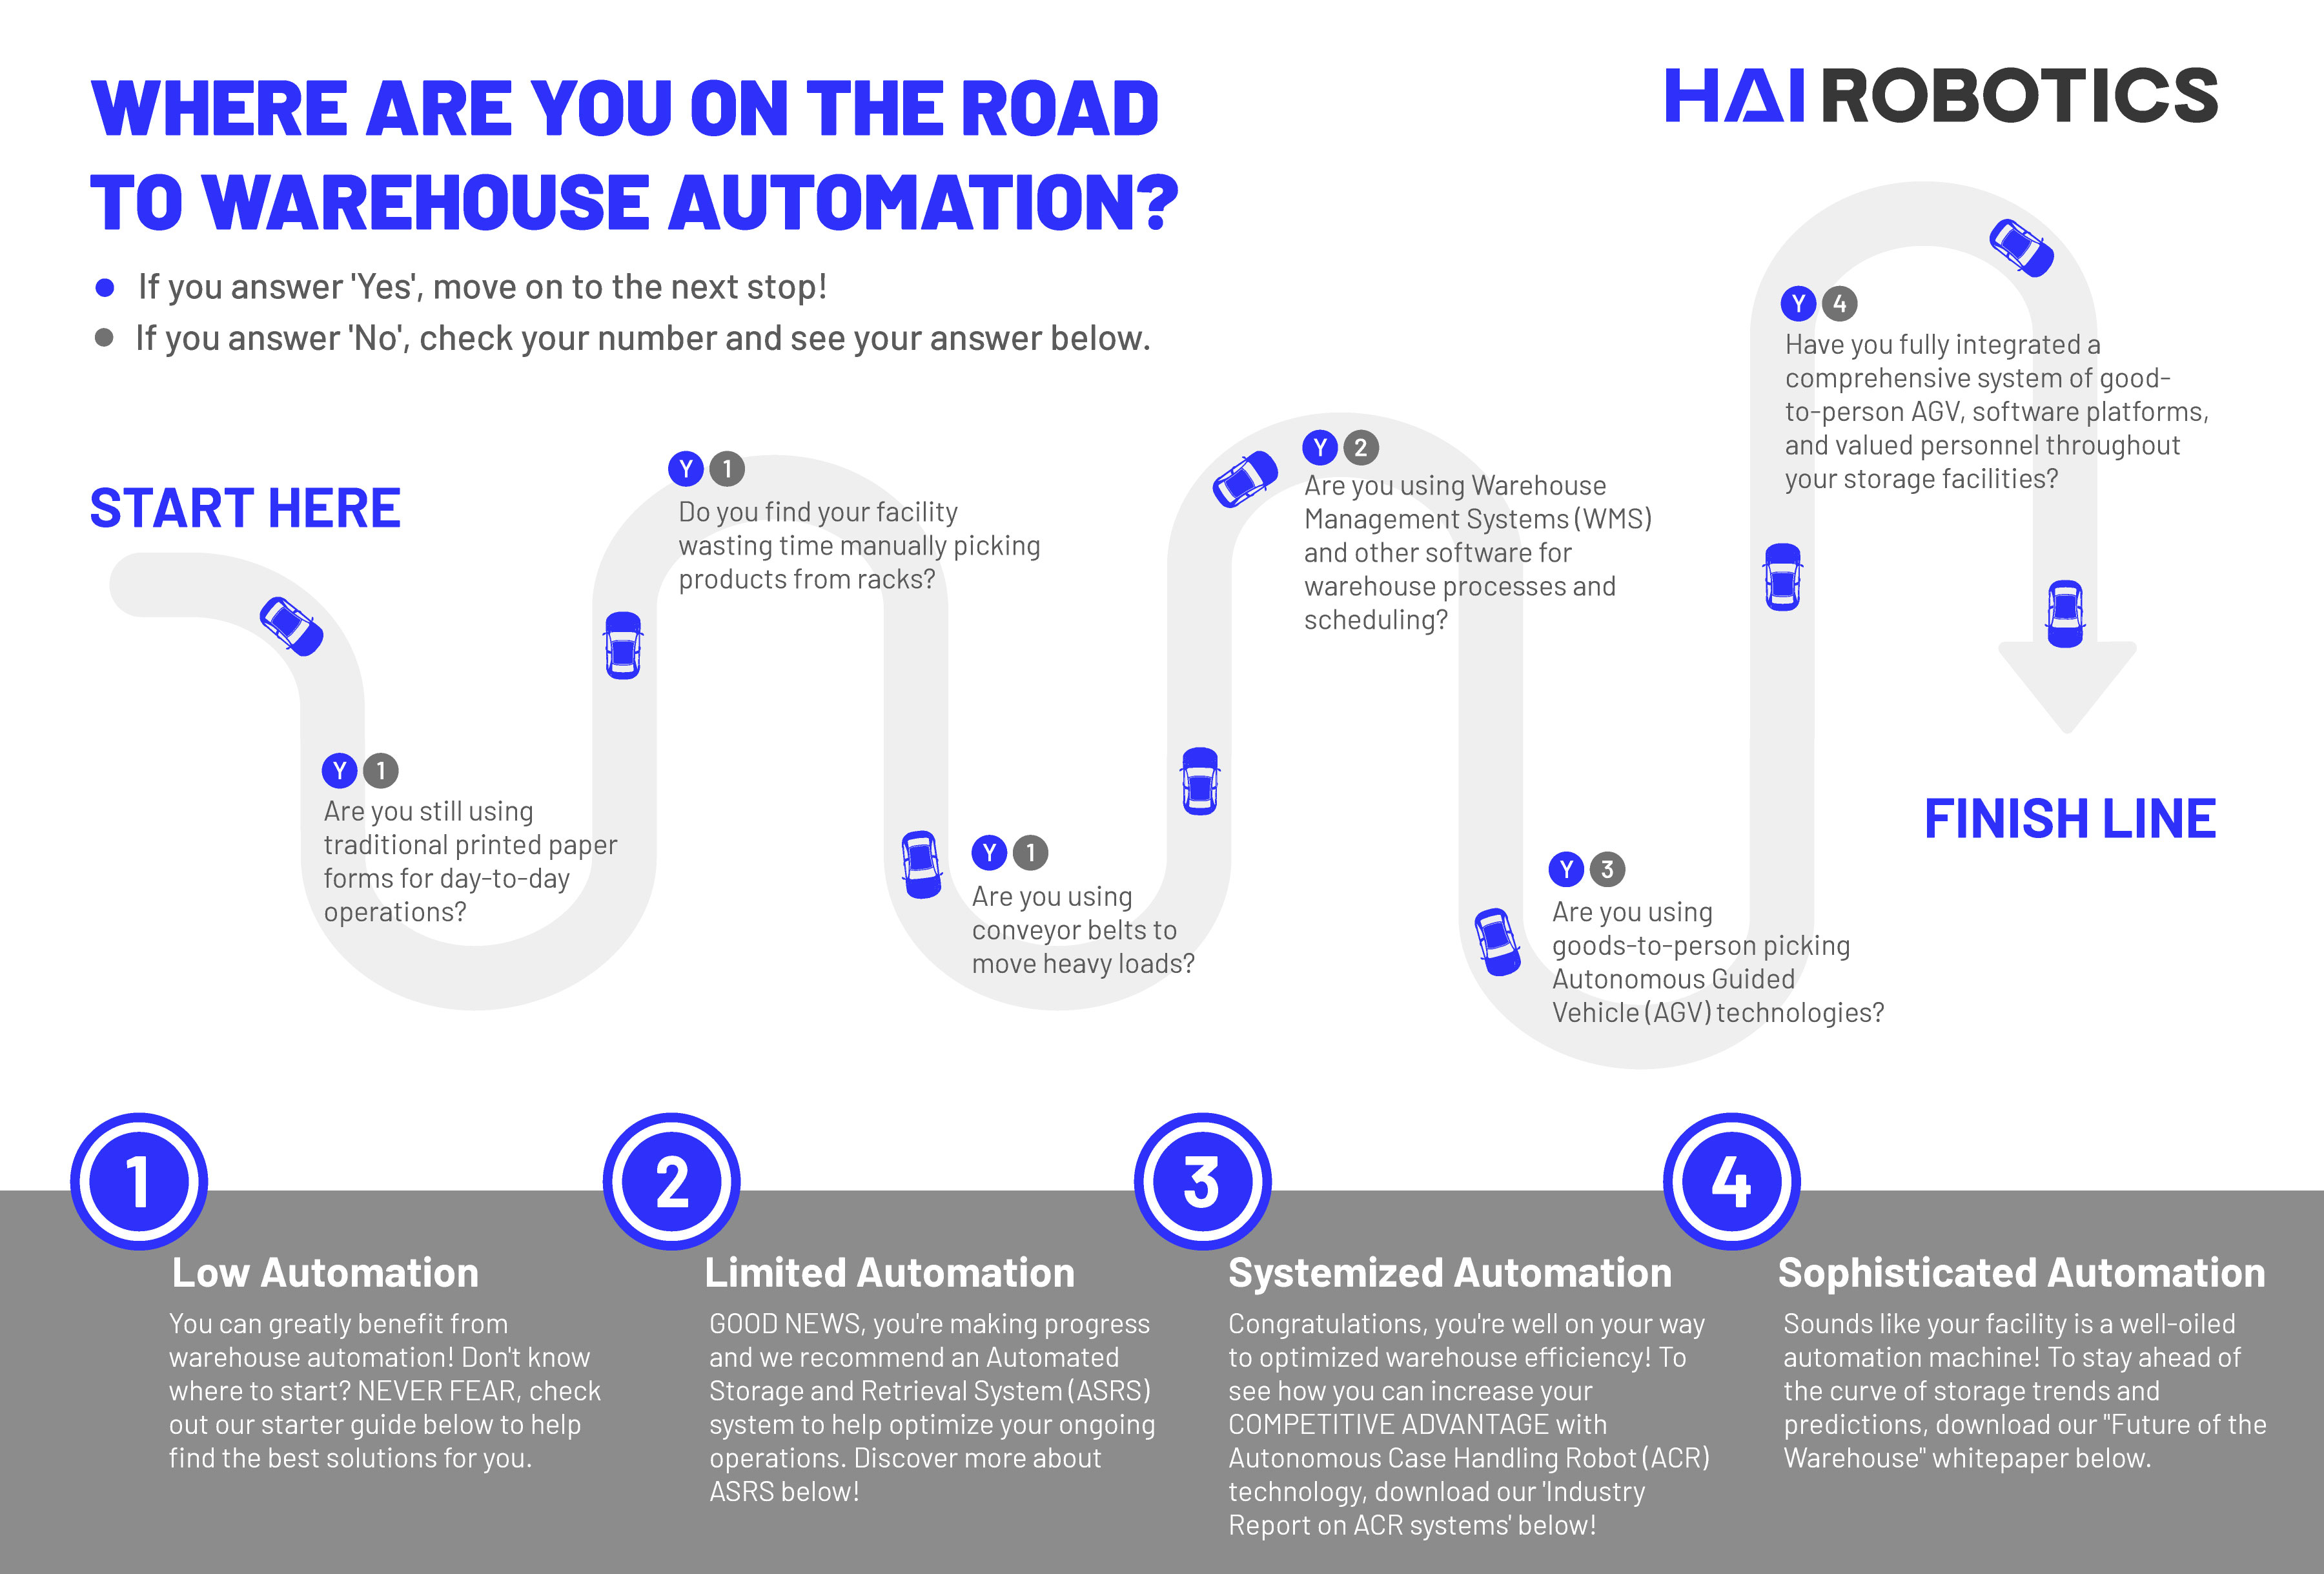 Where Are You On The Road To Warehouse Automation